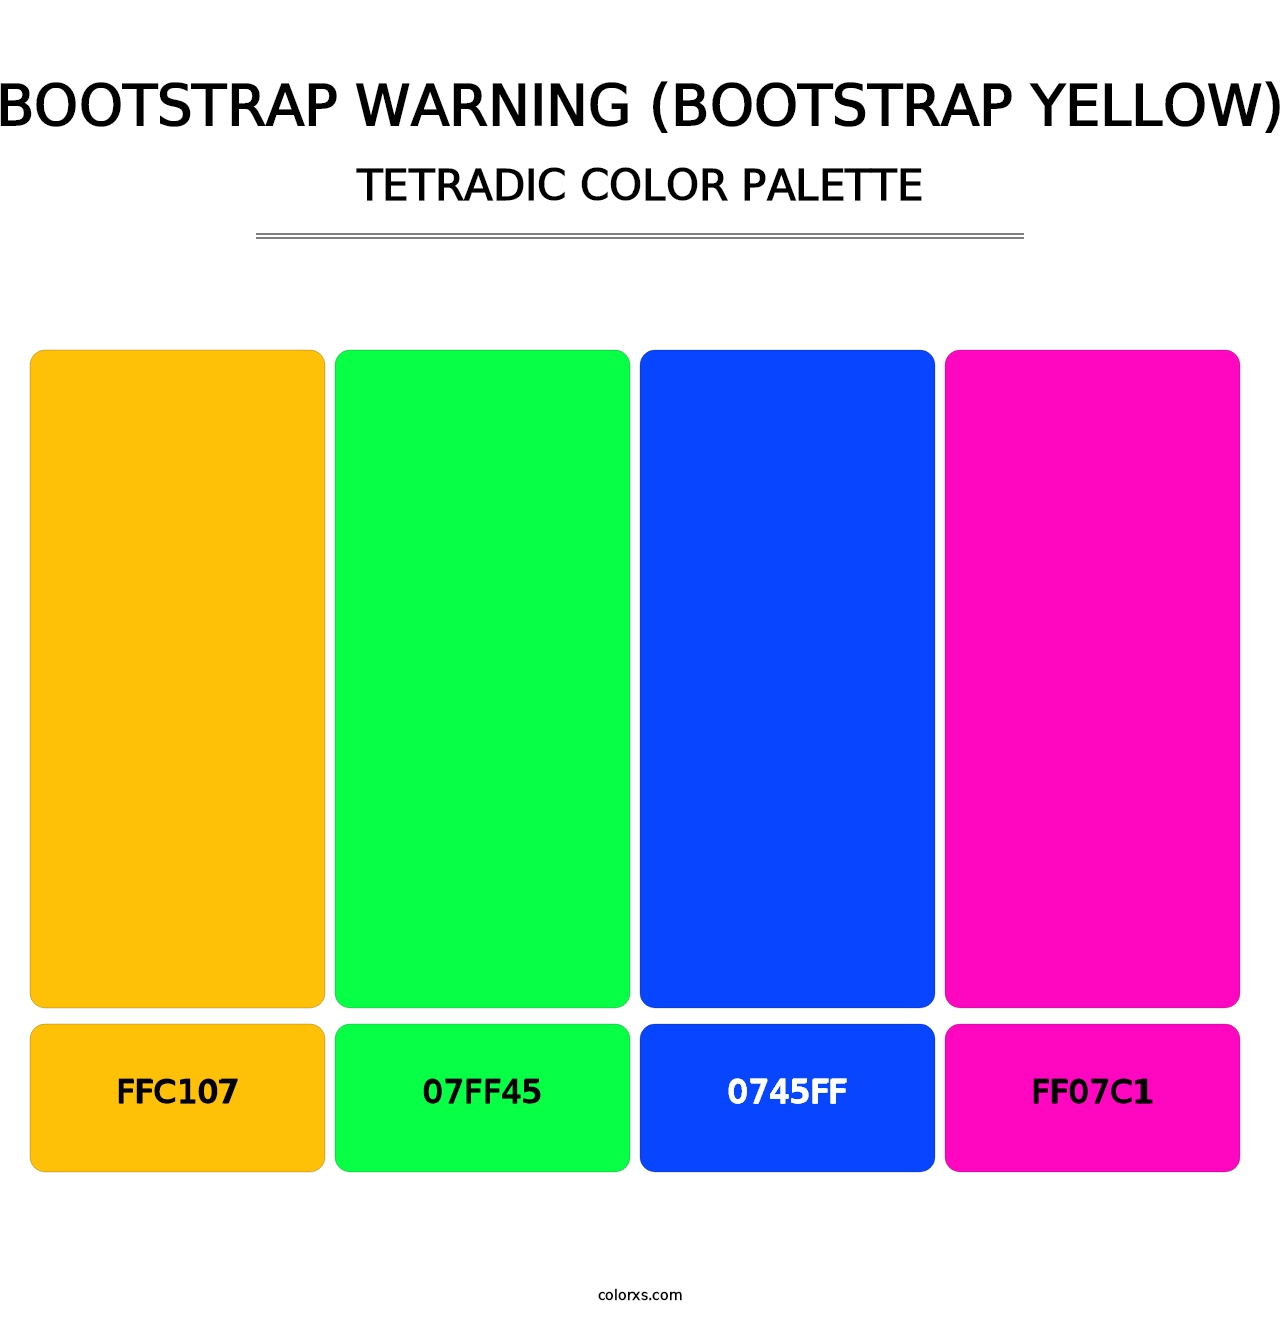 Bootstrap Warning (Bootstrap Yellow) - Tetradic Color Palette